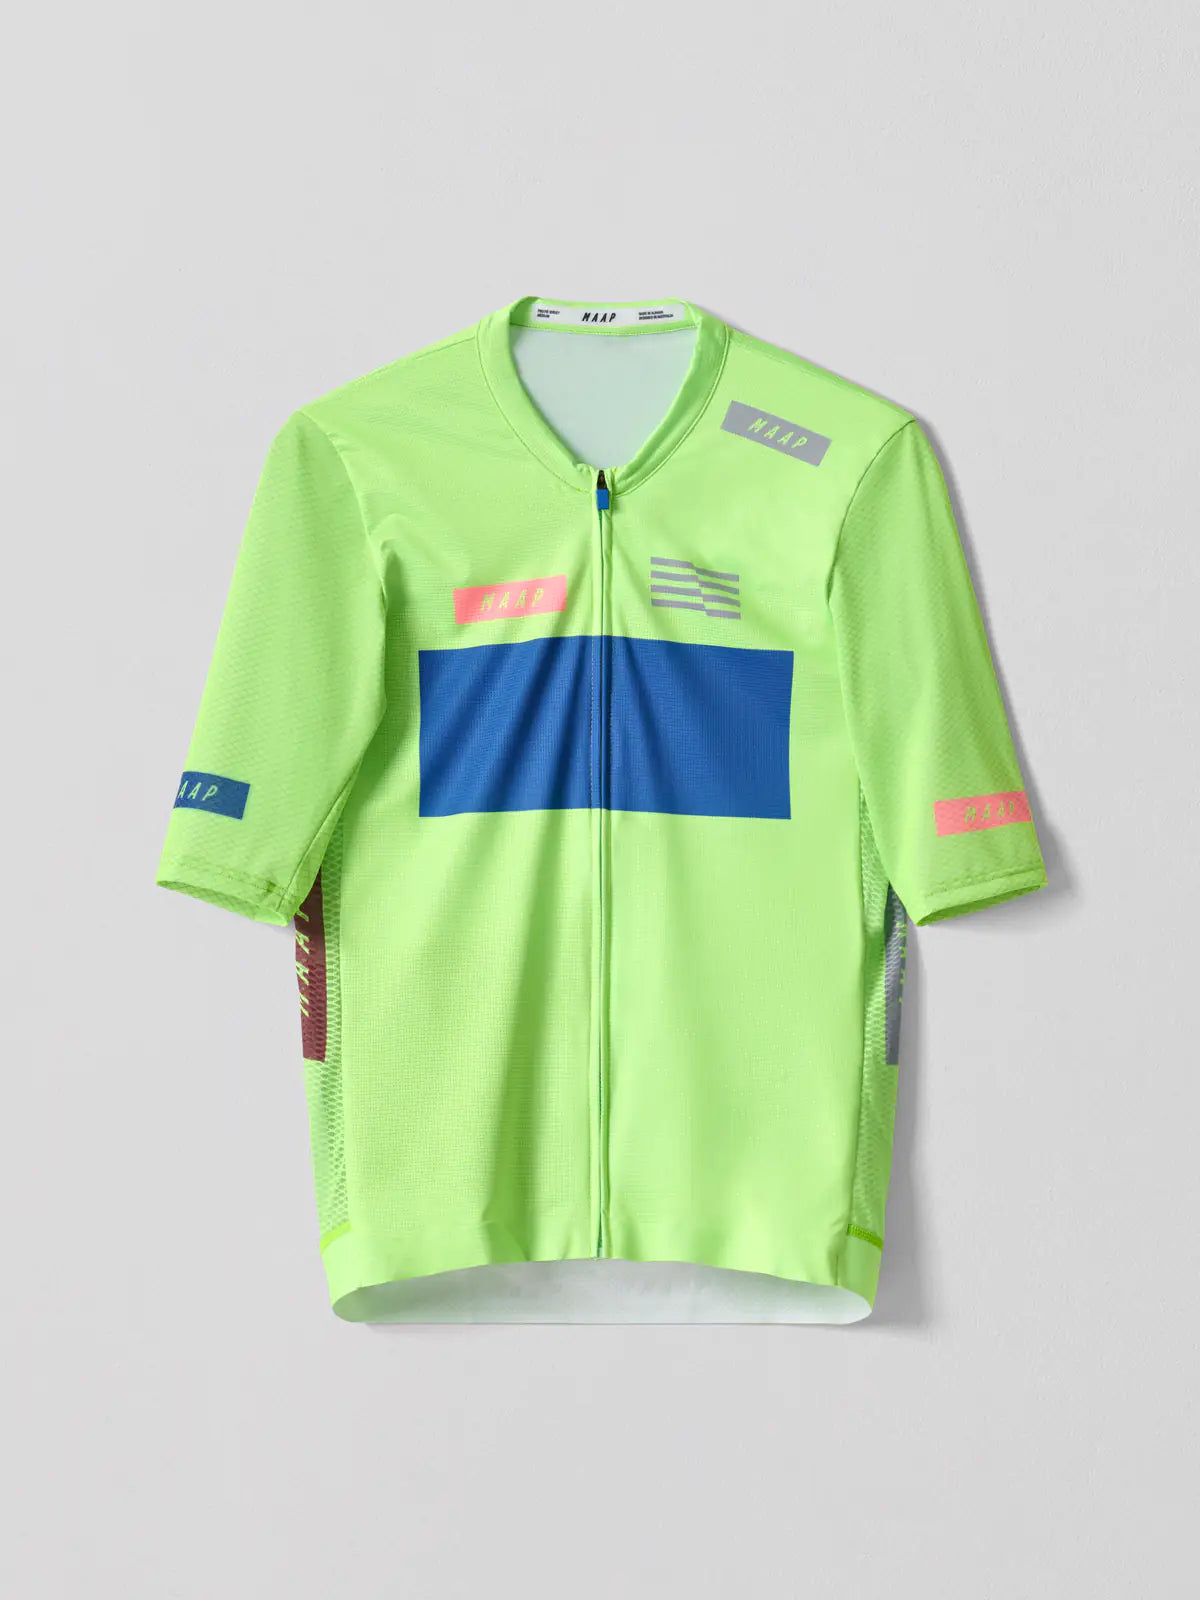 MAAP System Pro Air Jersey Glow メンズ サイクルジャージ | CYCLISM